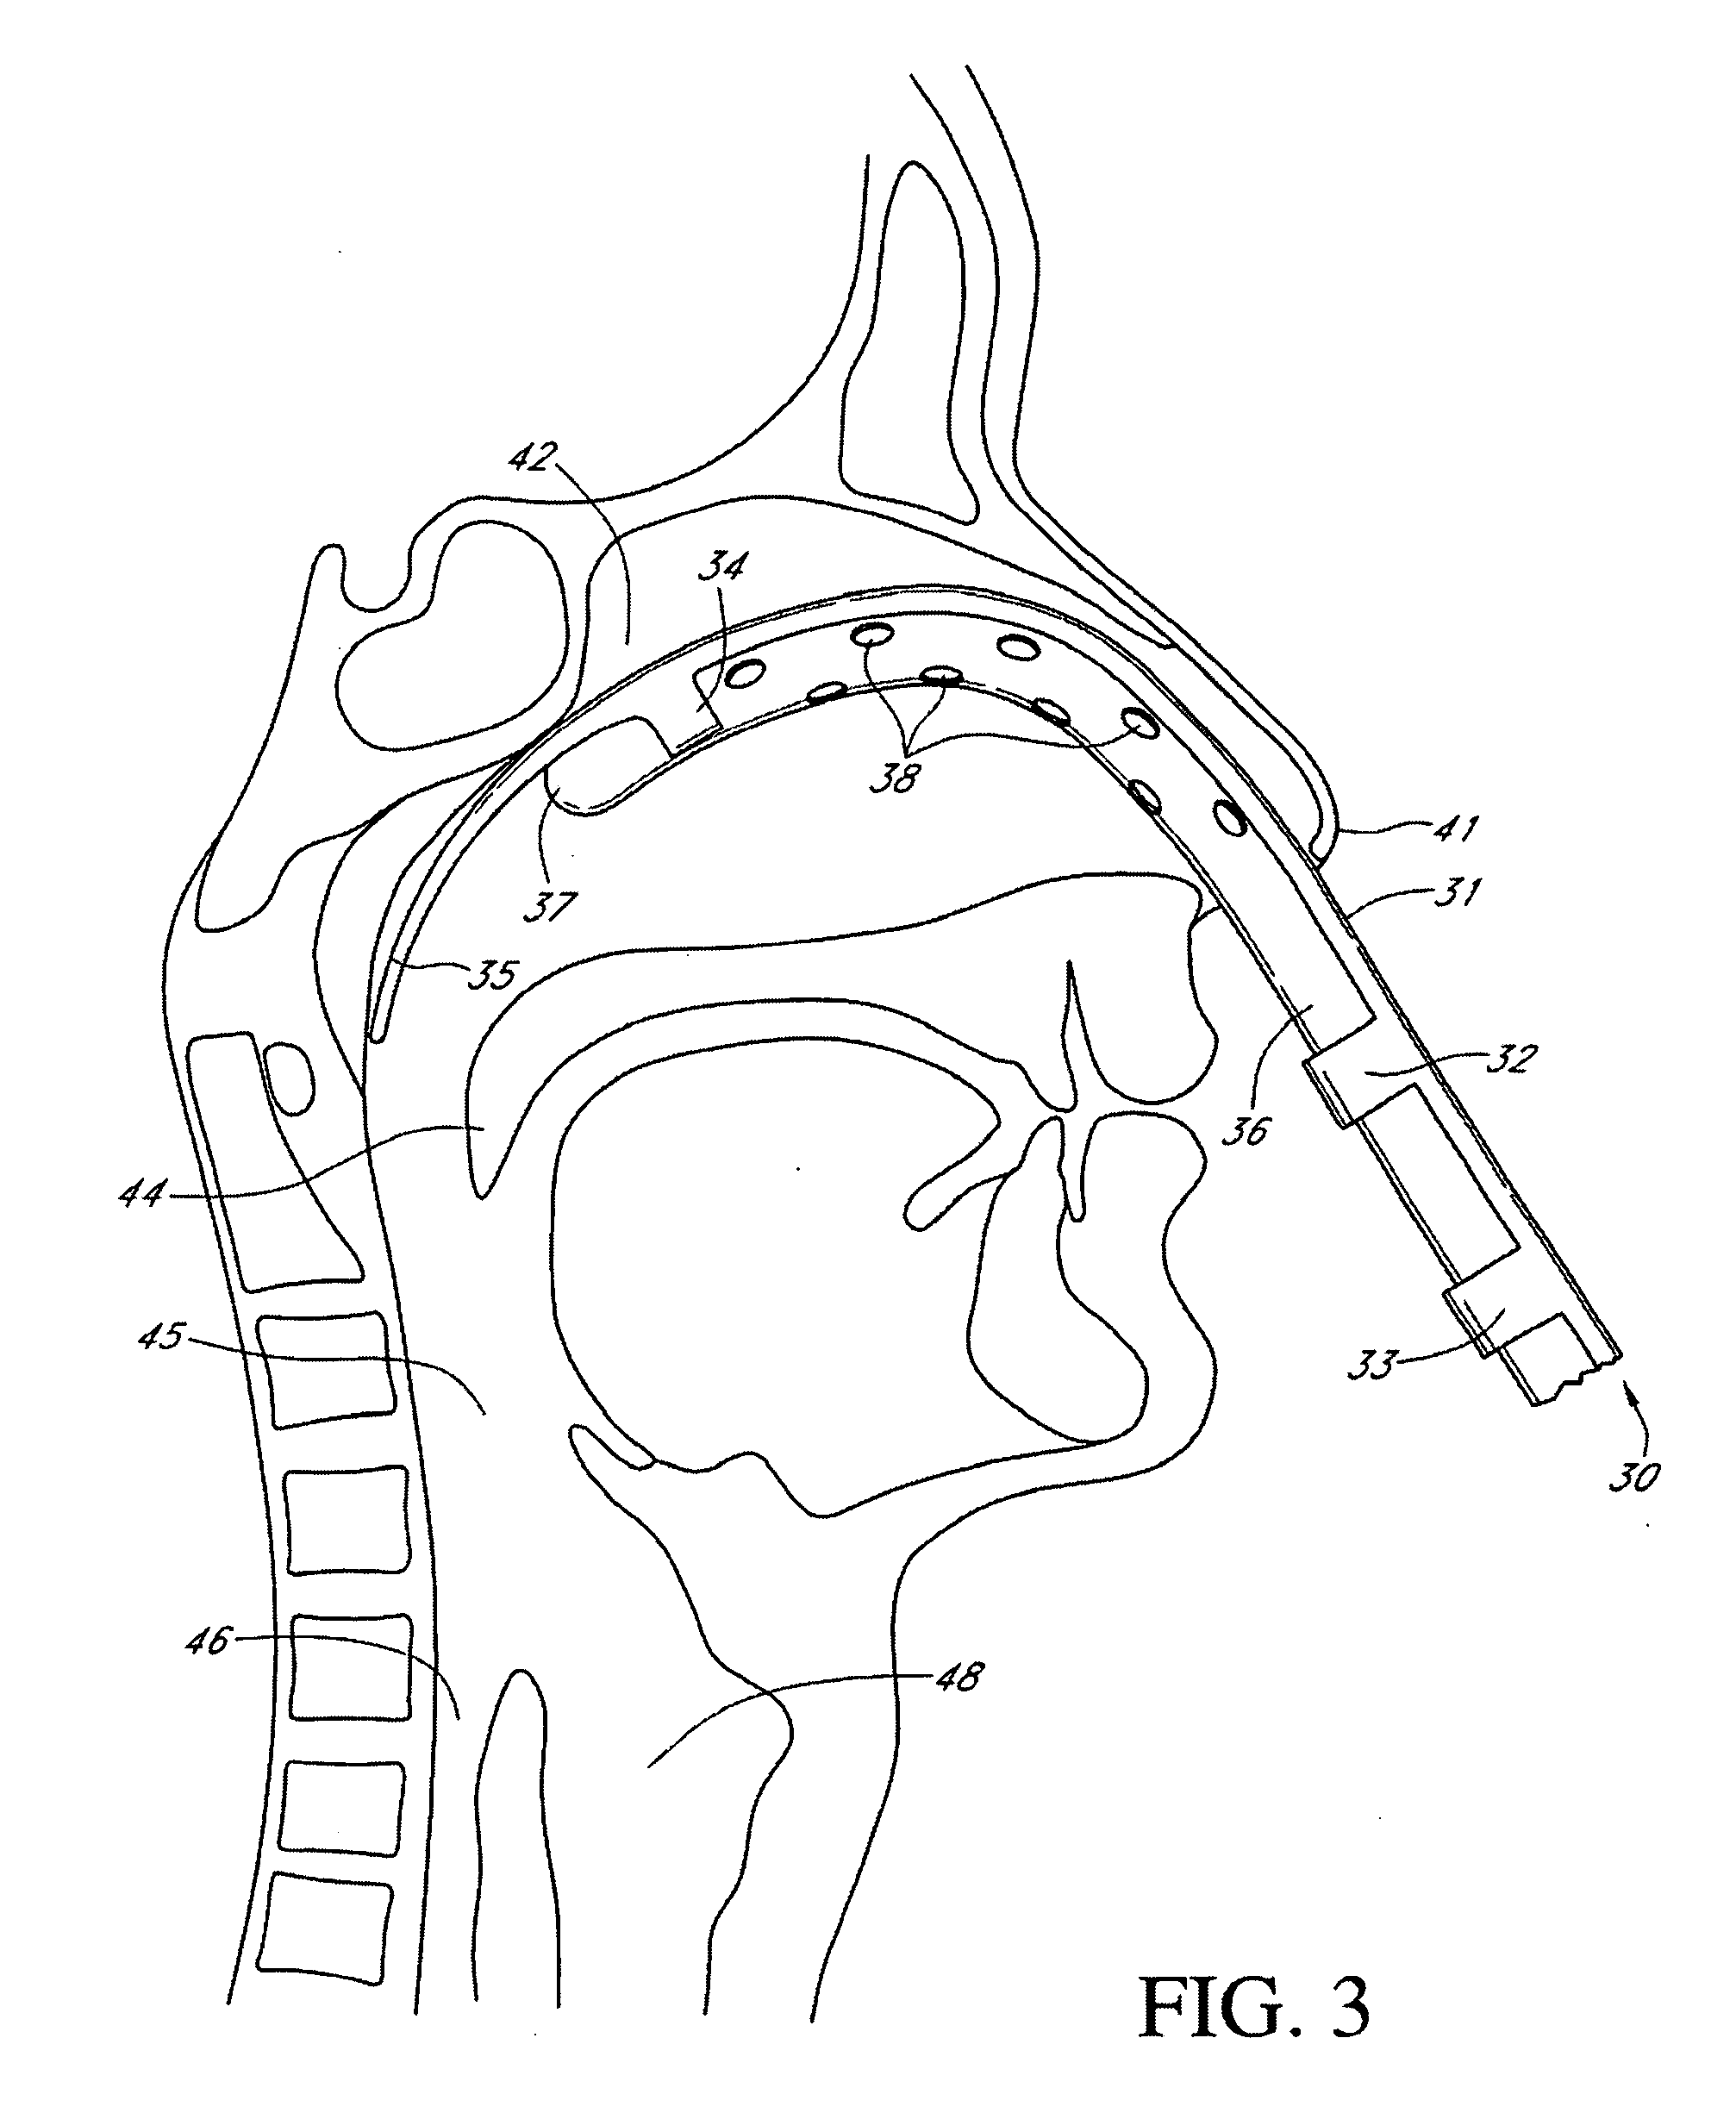 Intubation devices and methods of use thereof